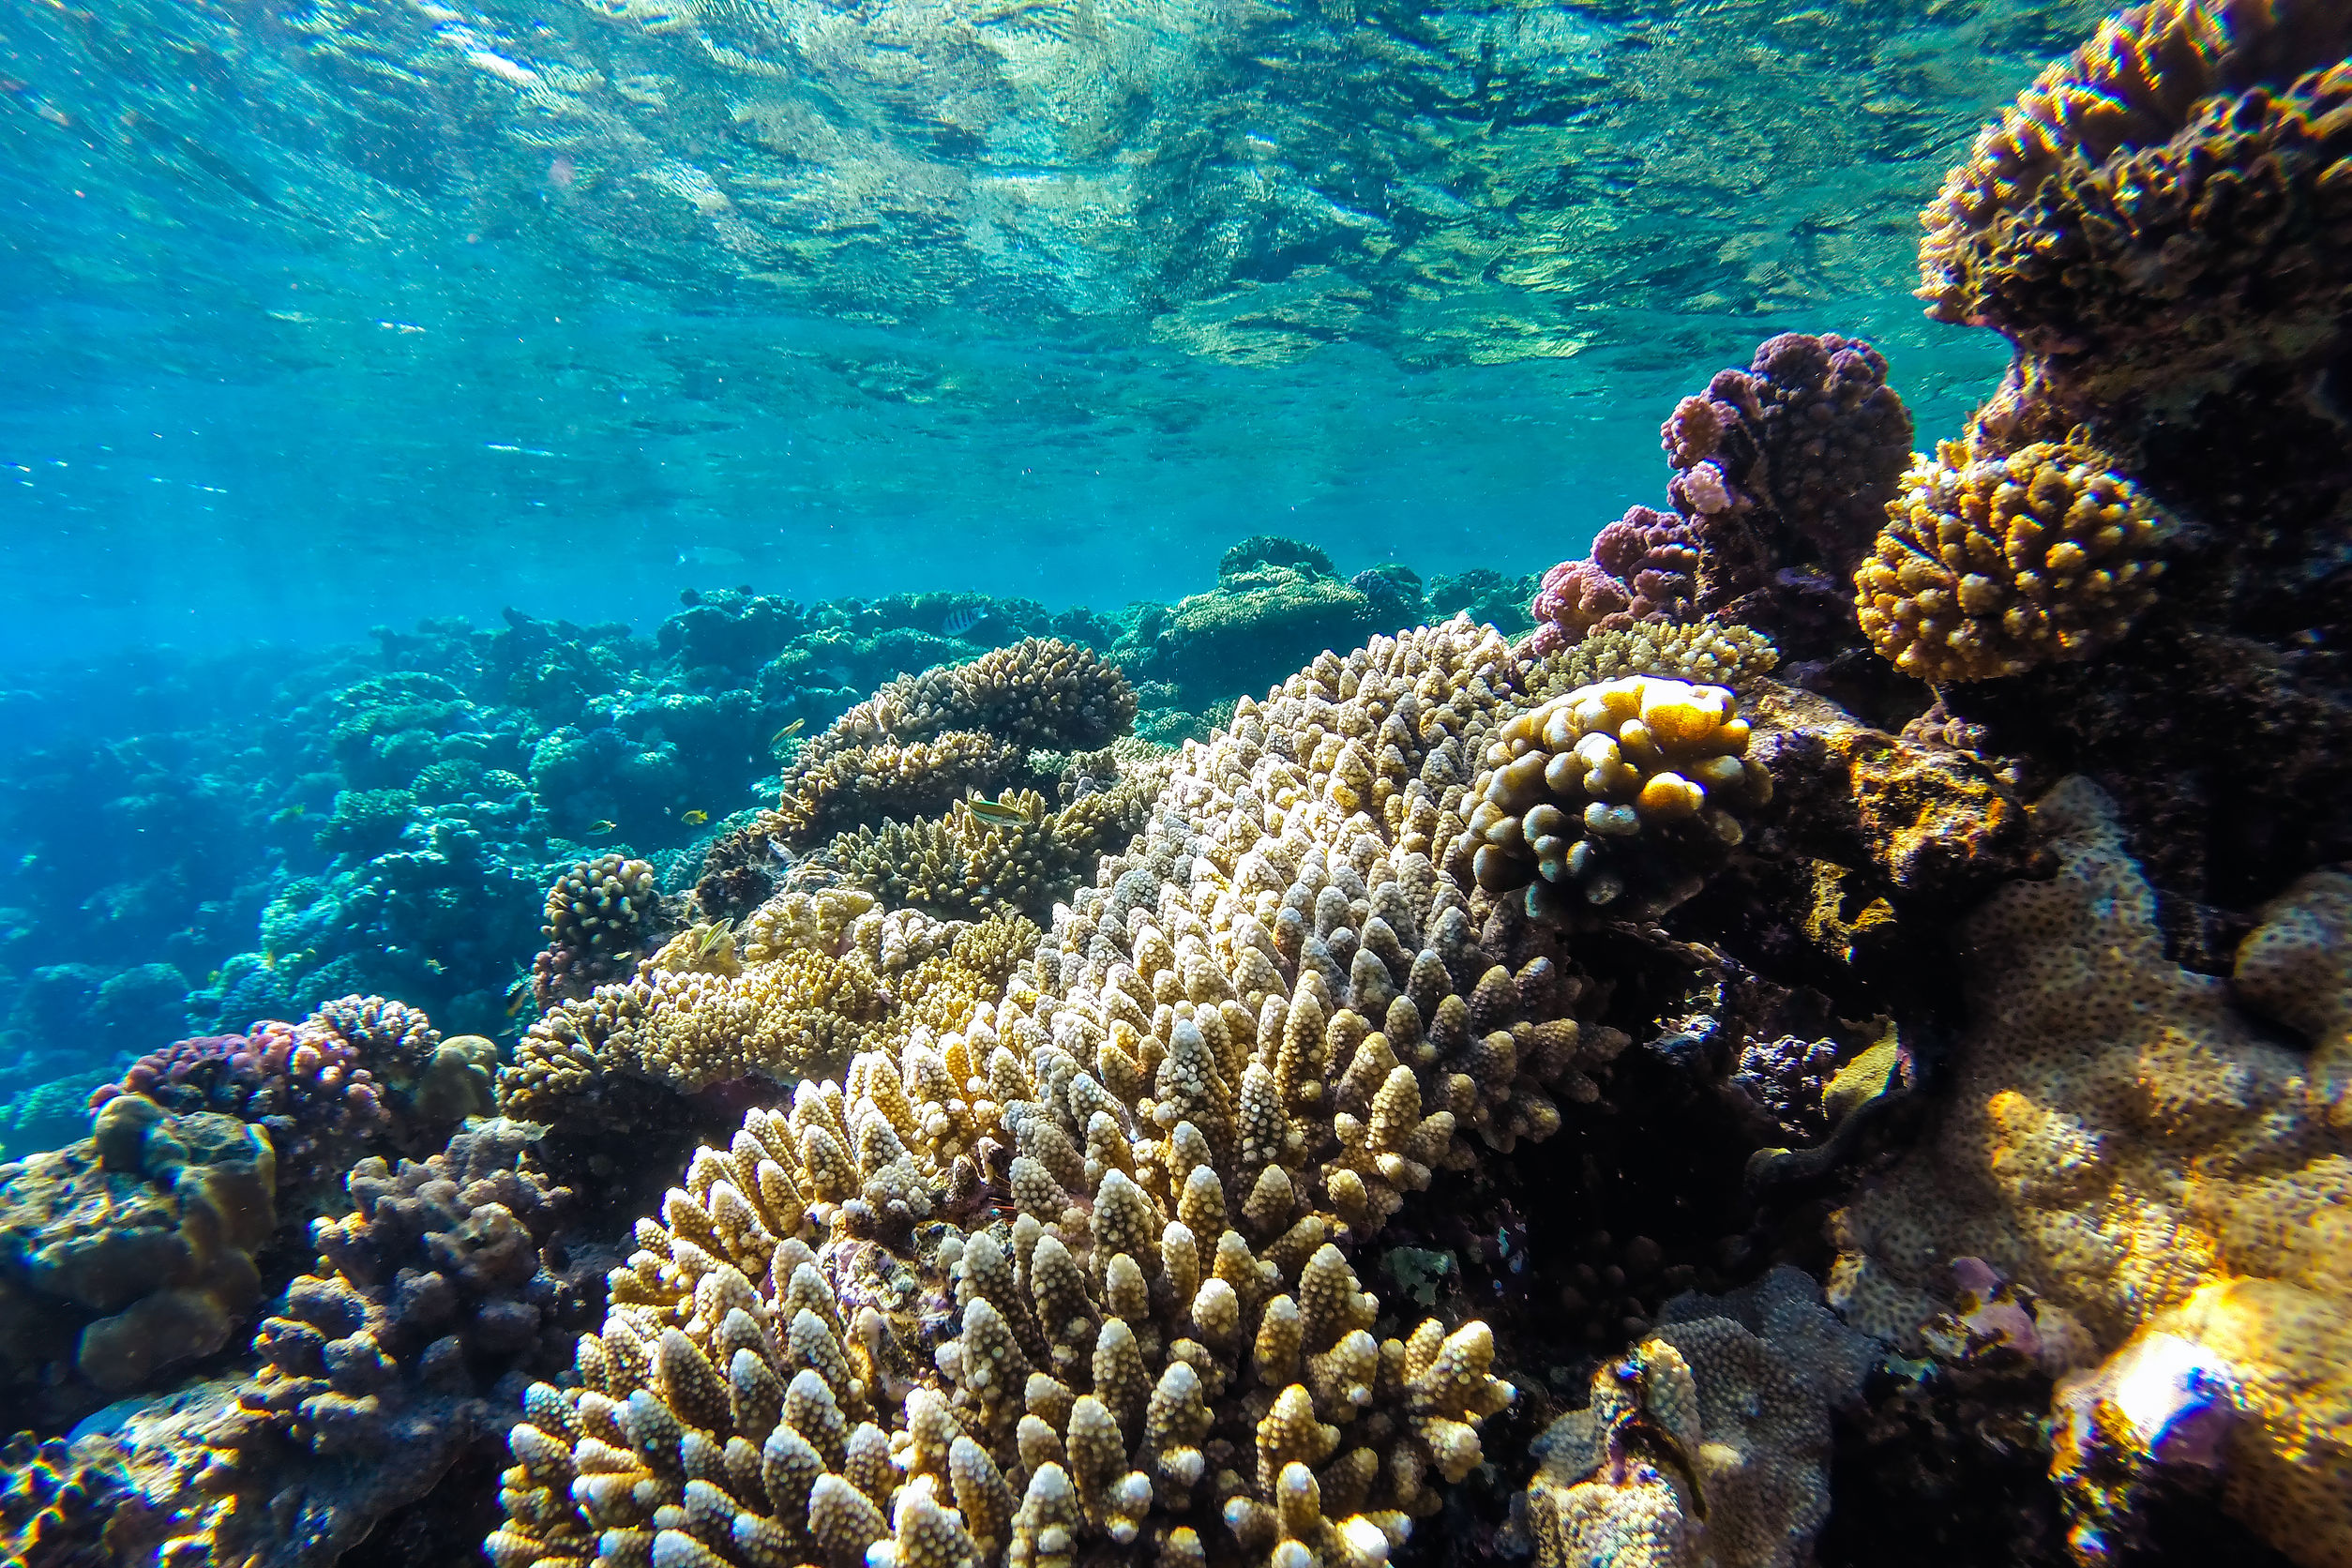 43548509 - red sea coral reef with hard corals, fishes and sunny sky shining through clean water - underwater photo